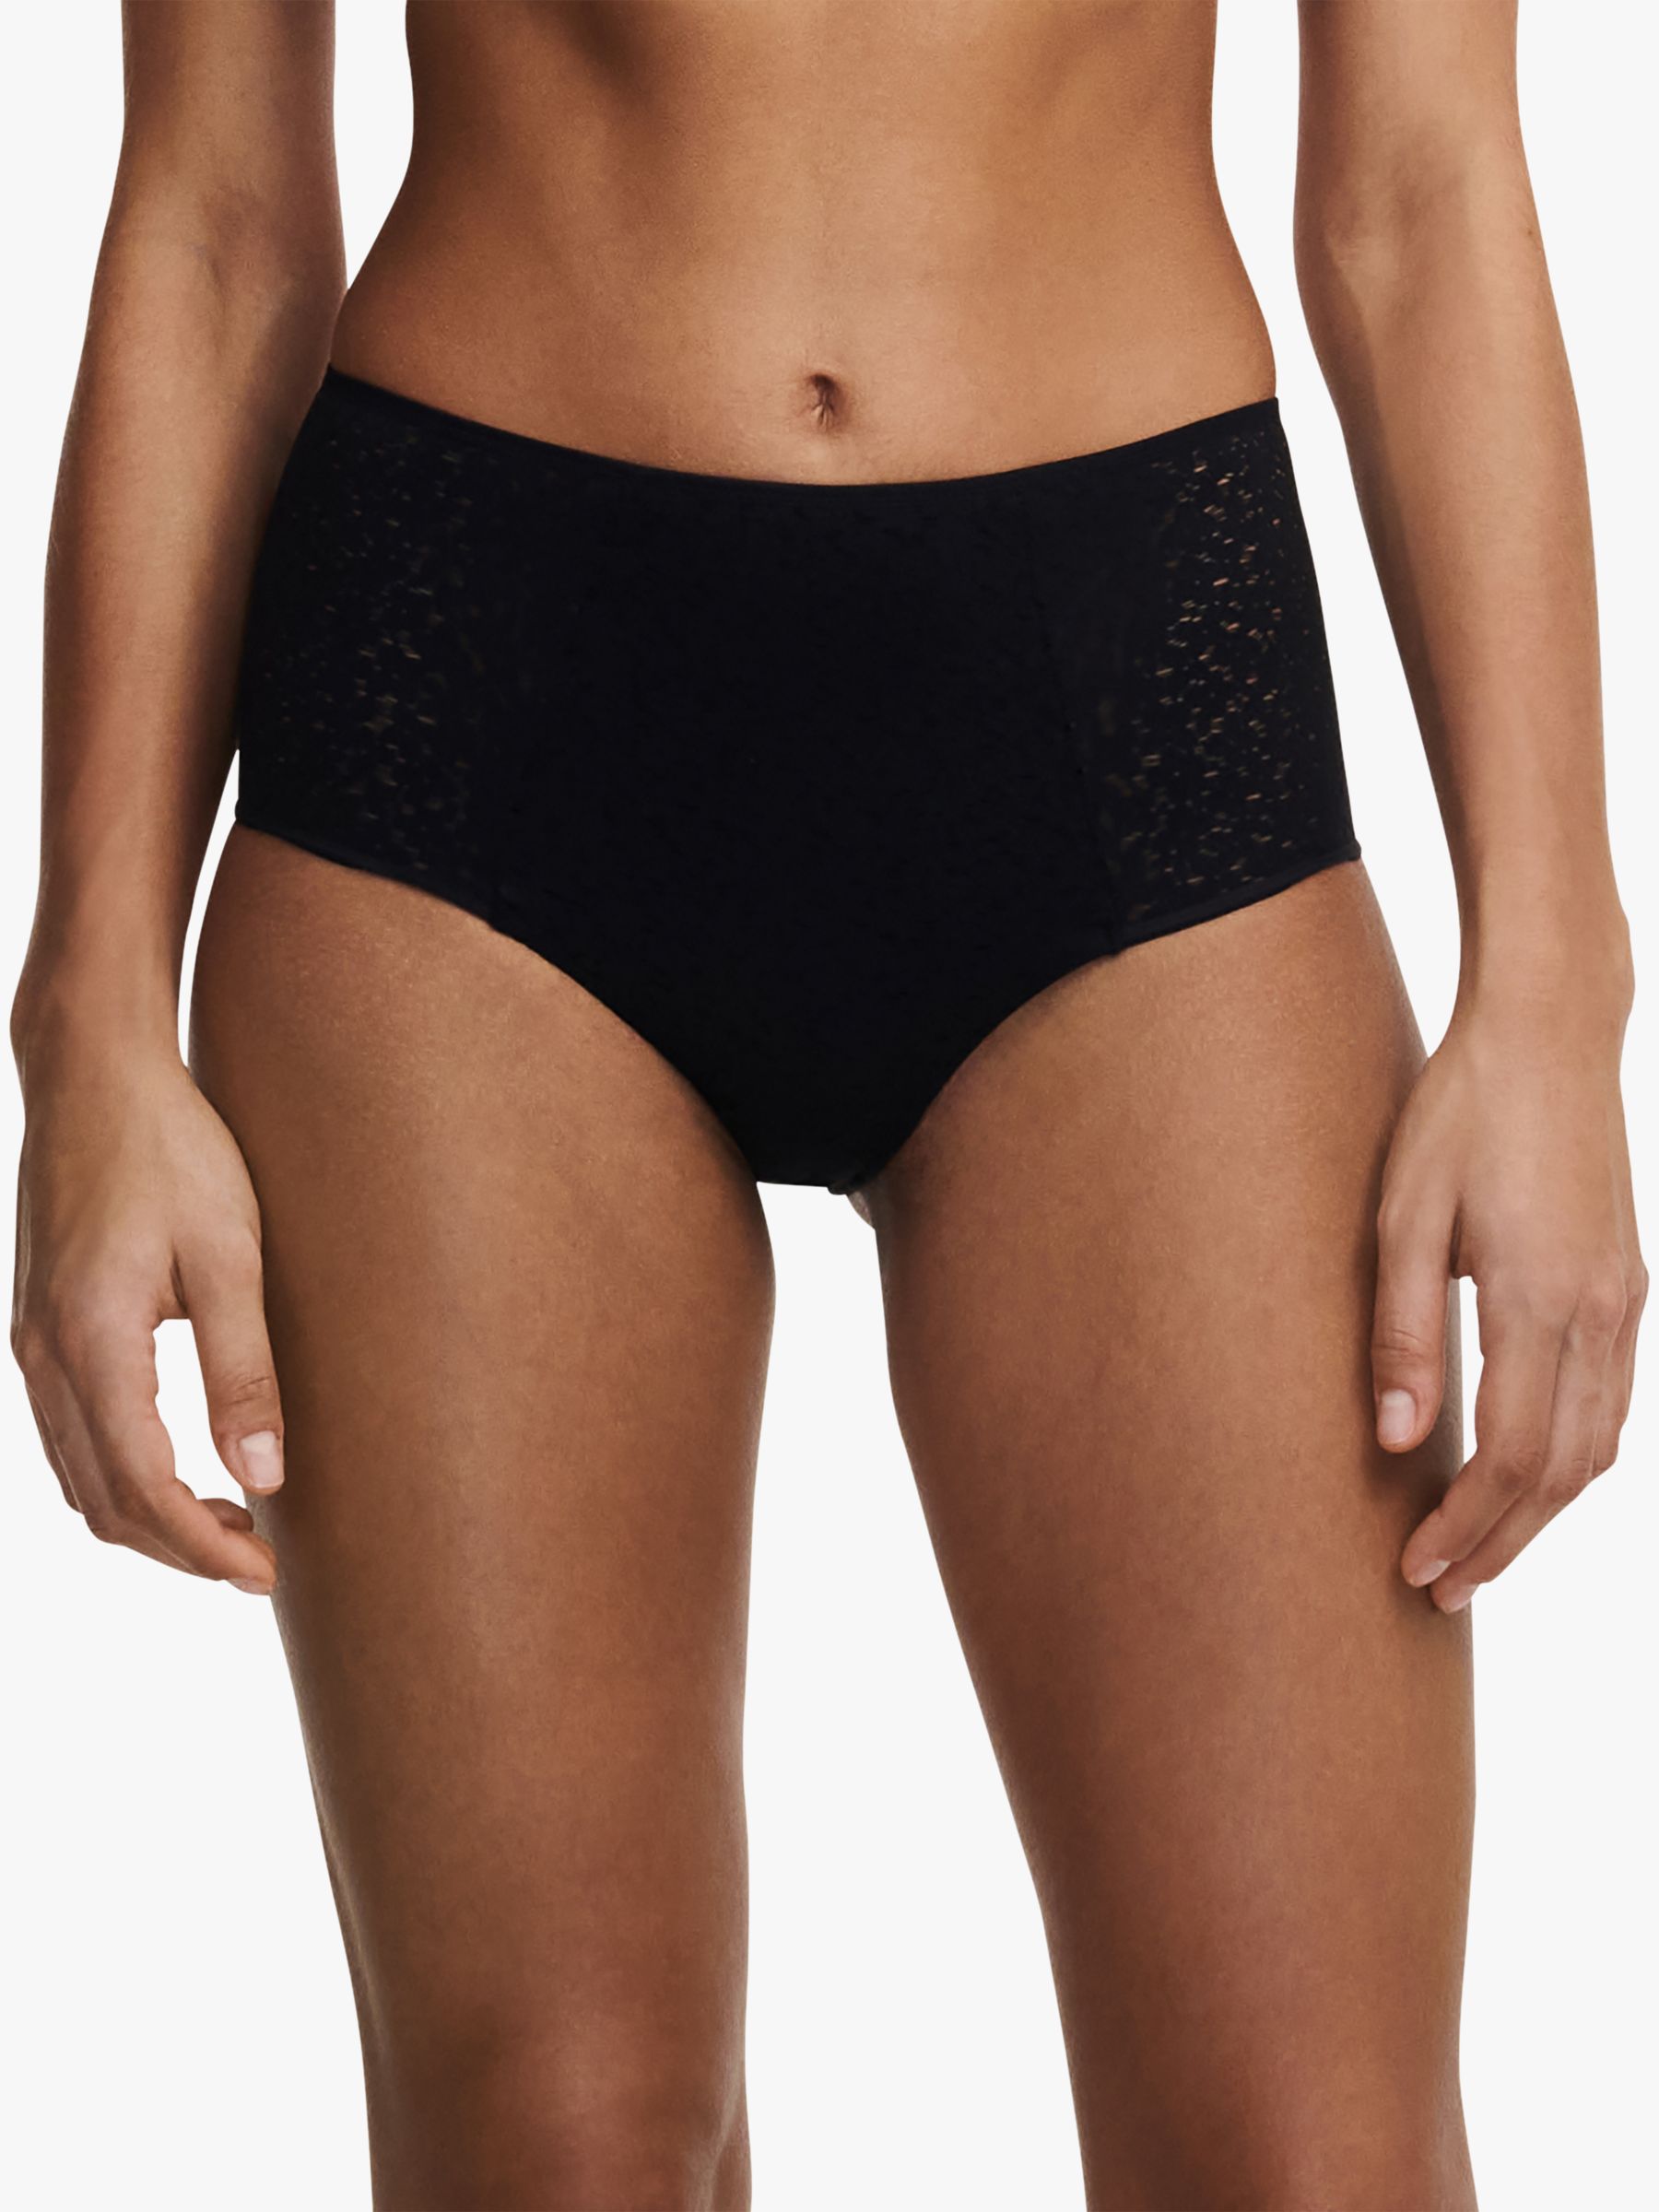 Chantelle Norah Comfort High Waisted Knickers, Black, L